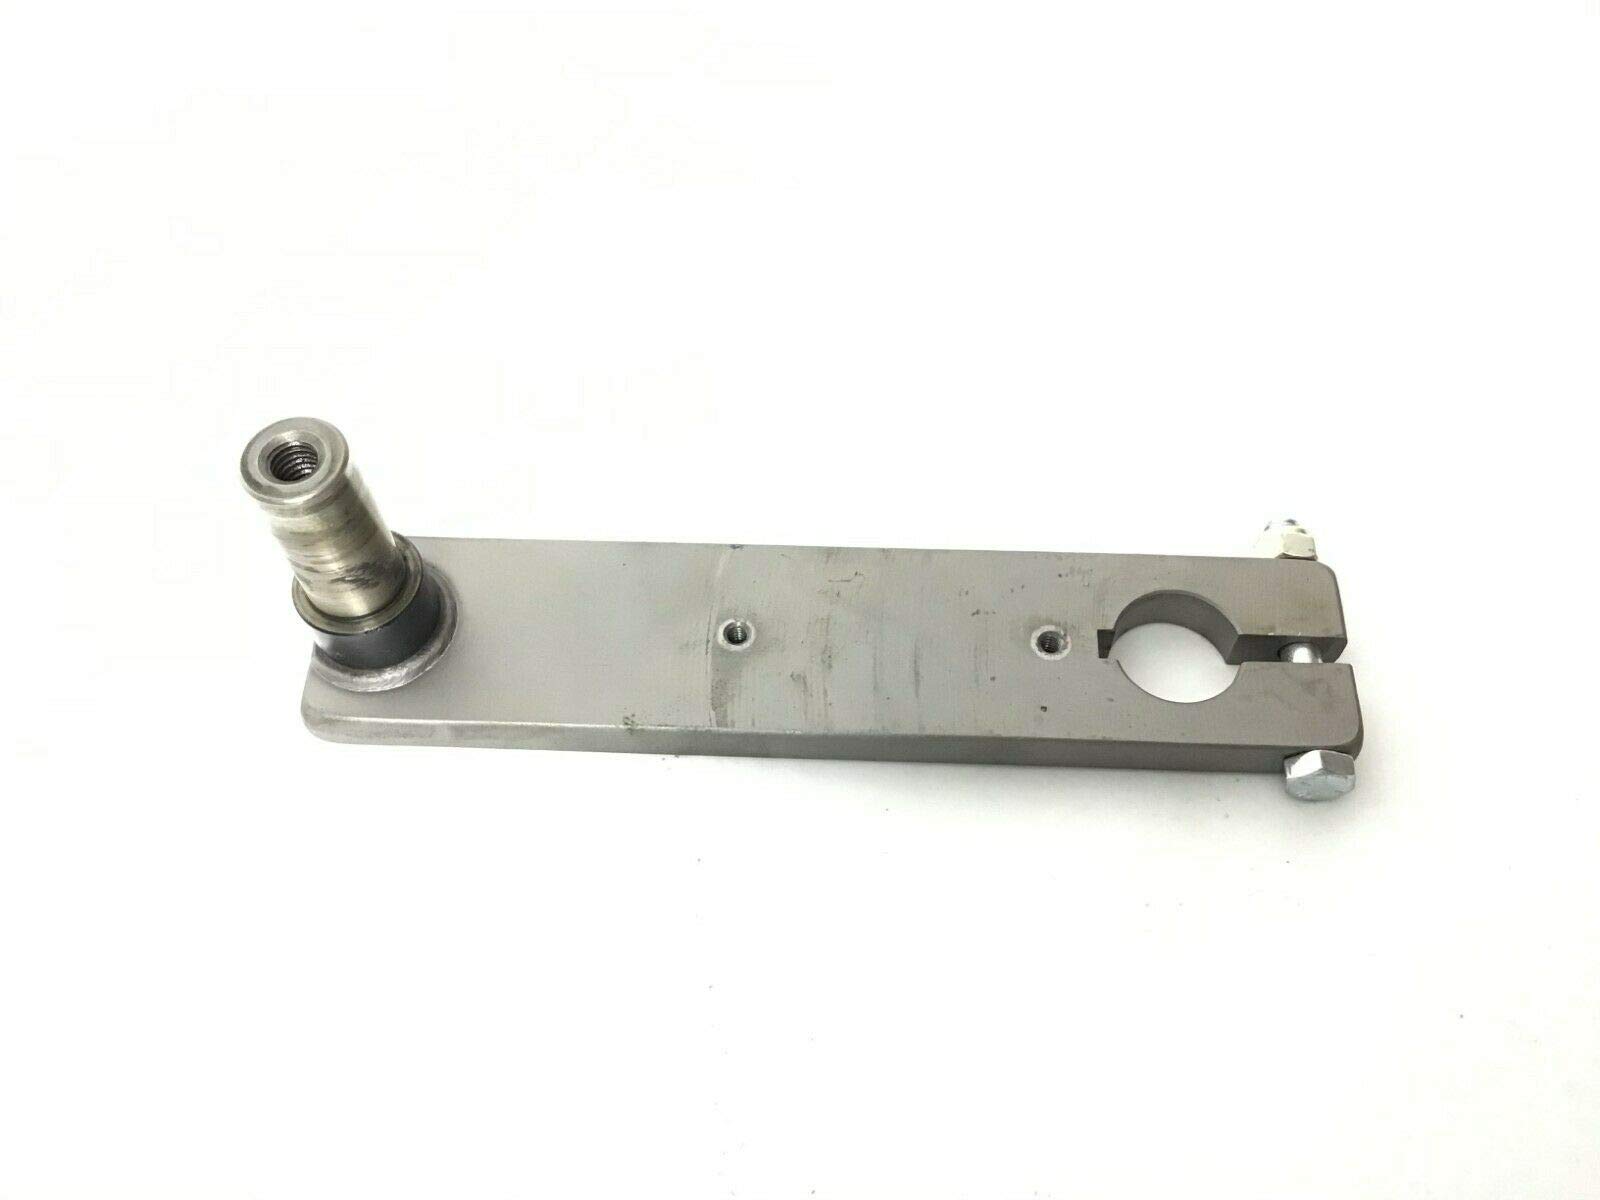 Universal (Left and Right) Crank Arm